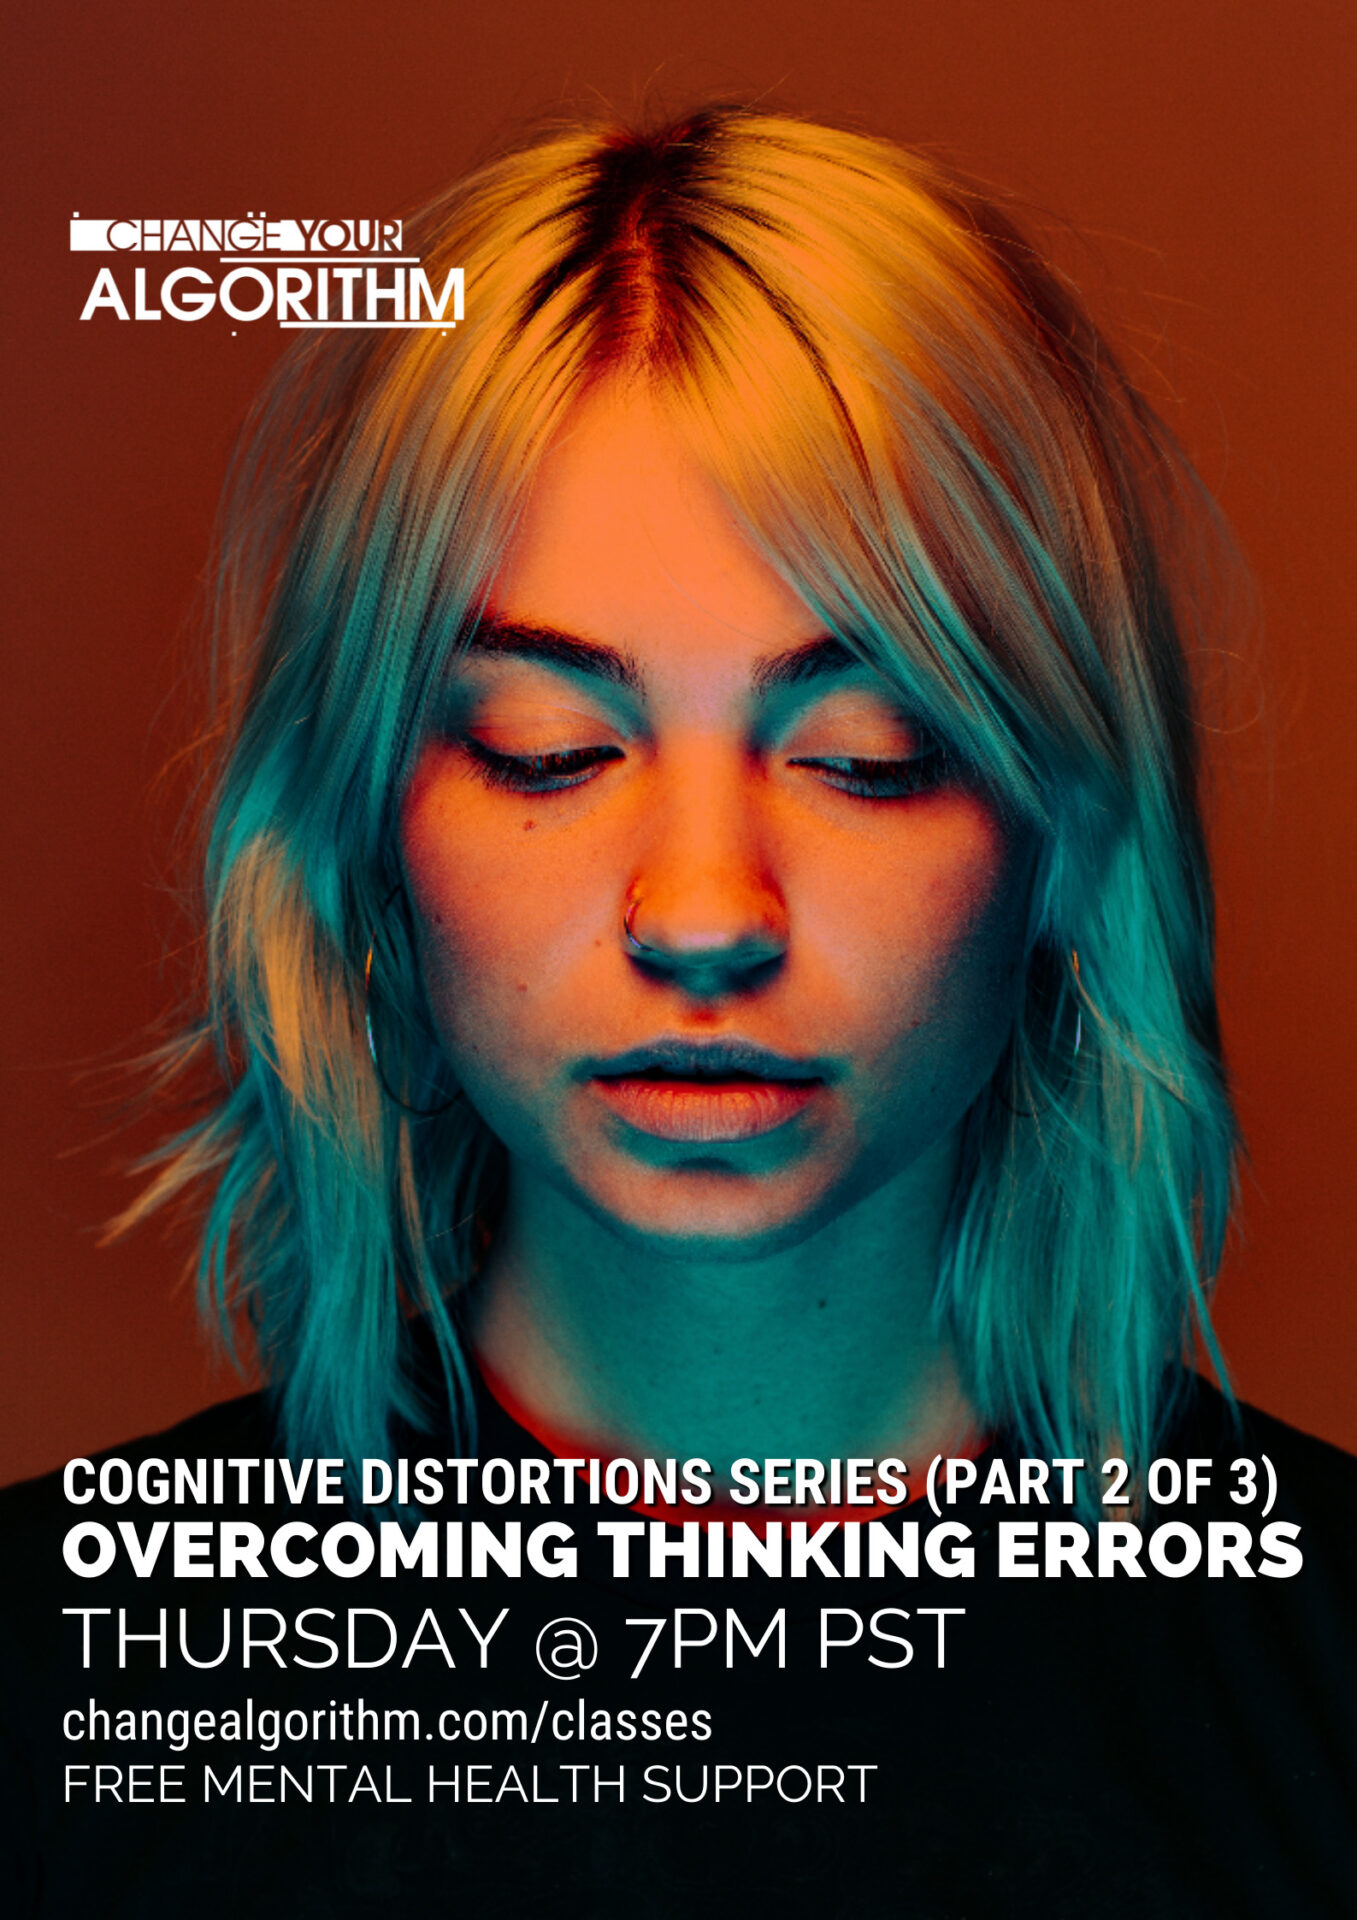 Cognitive Distortions Series (Part 2 of 3): Overcoming Thinking Errors